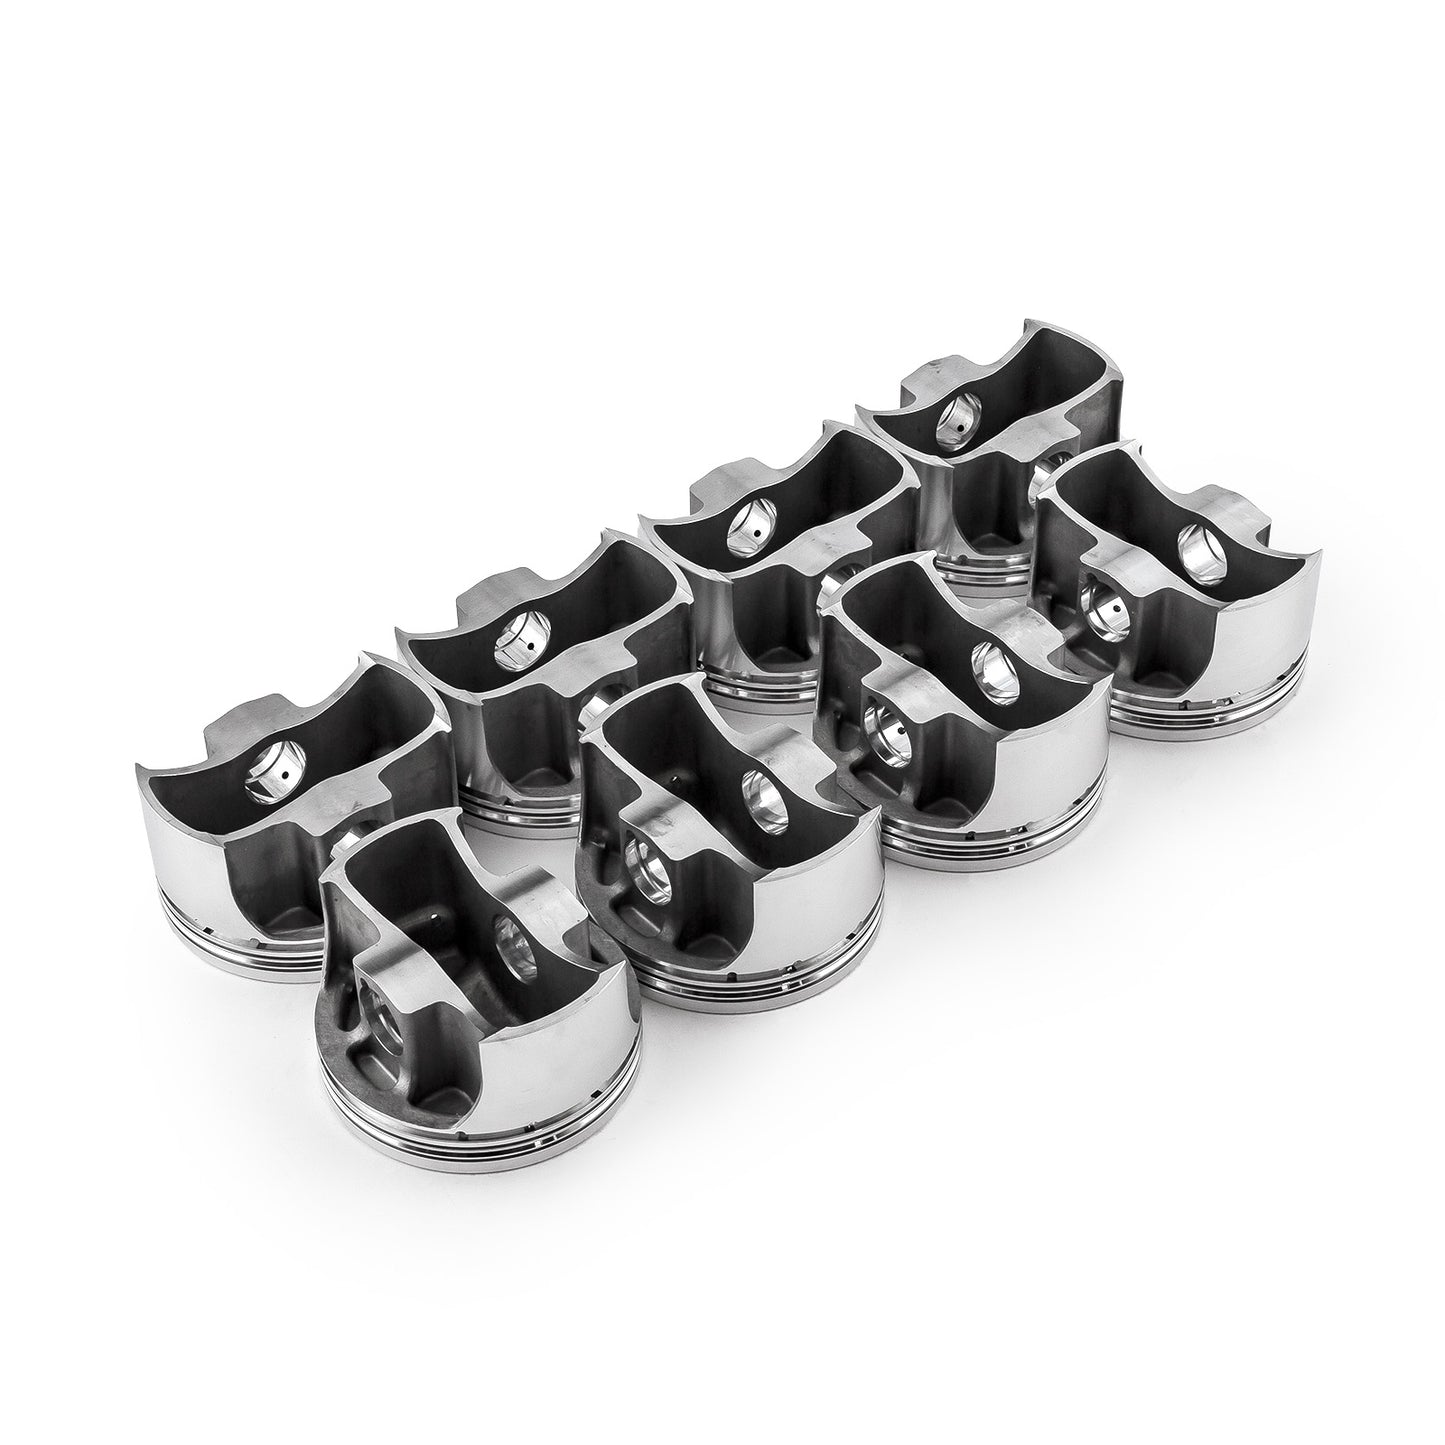 Speedmaster PCE305.1014 Fits Chevy SBC 383 Ci 5.7" 4.060" 1.425" 0.927" Flat Top Forged Pistons